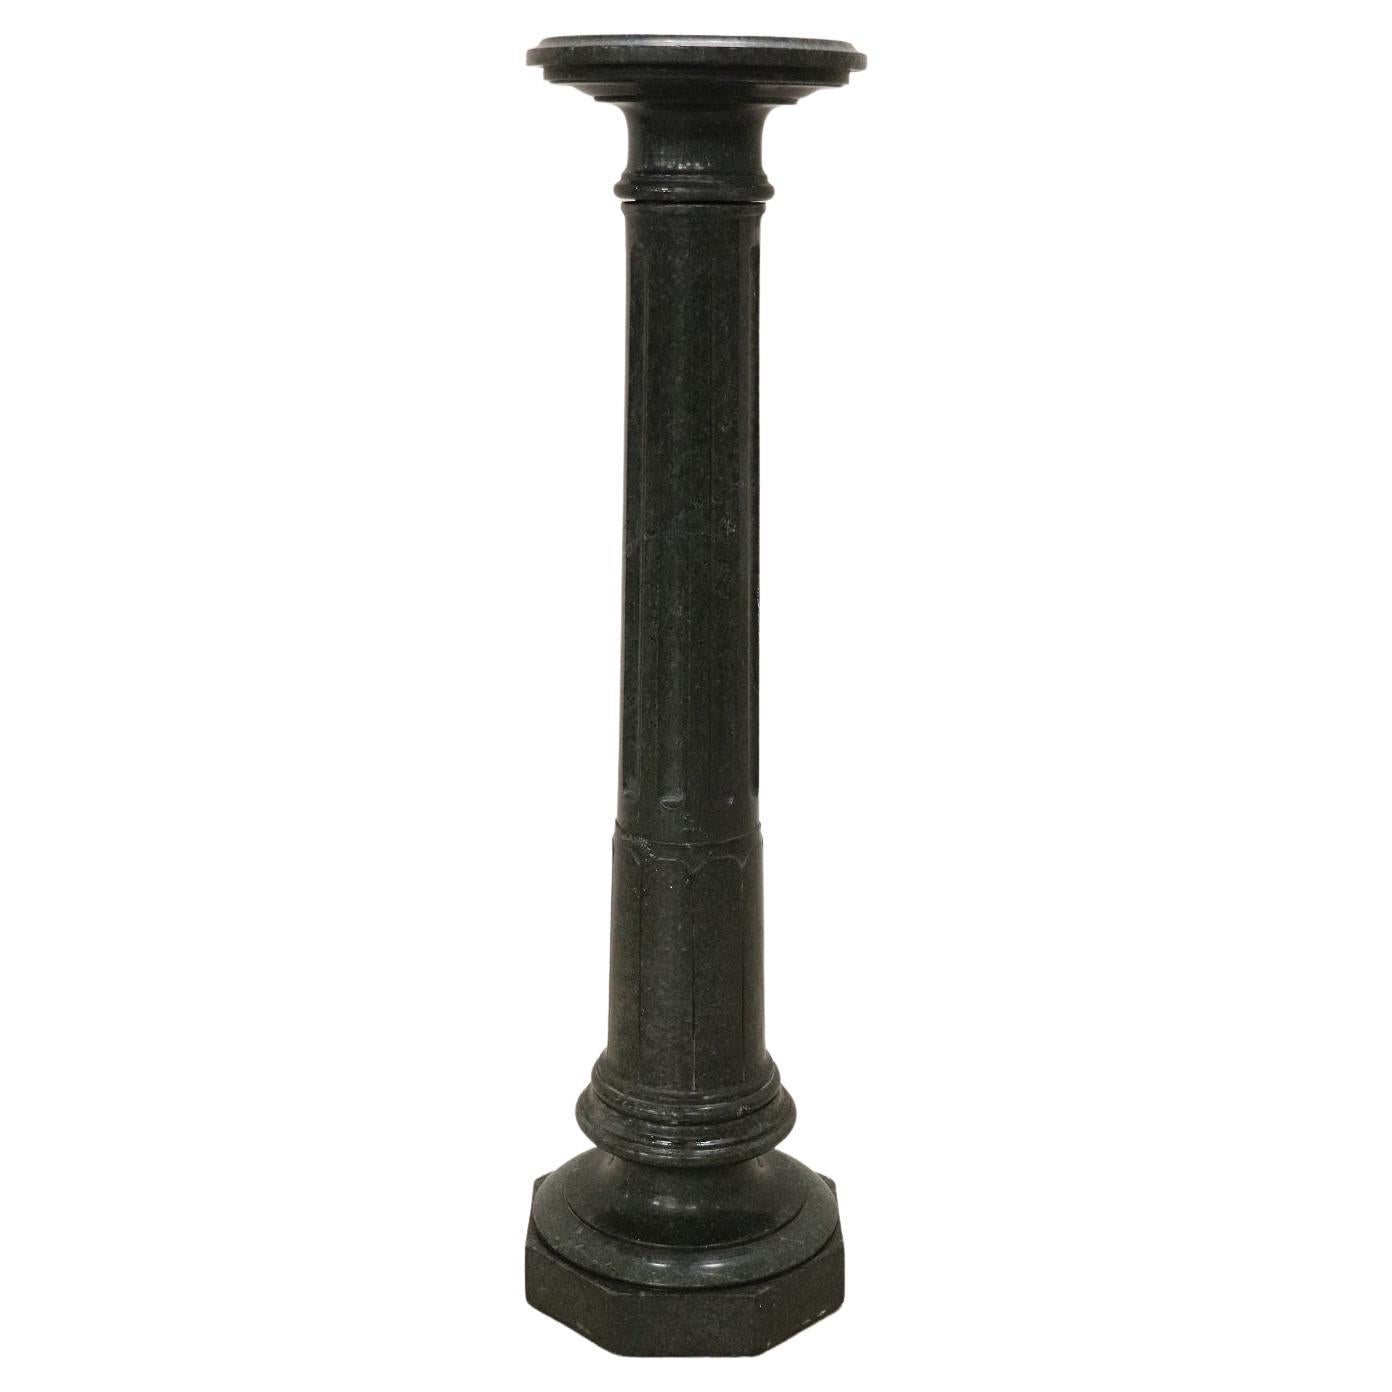 19th Century Italian Antique Column in Green Marble from the Alps